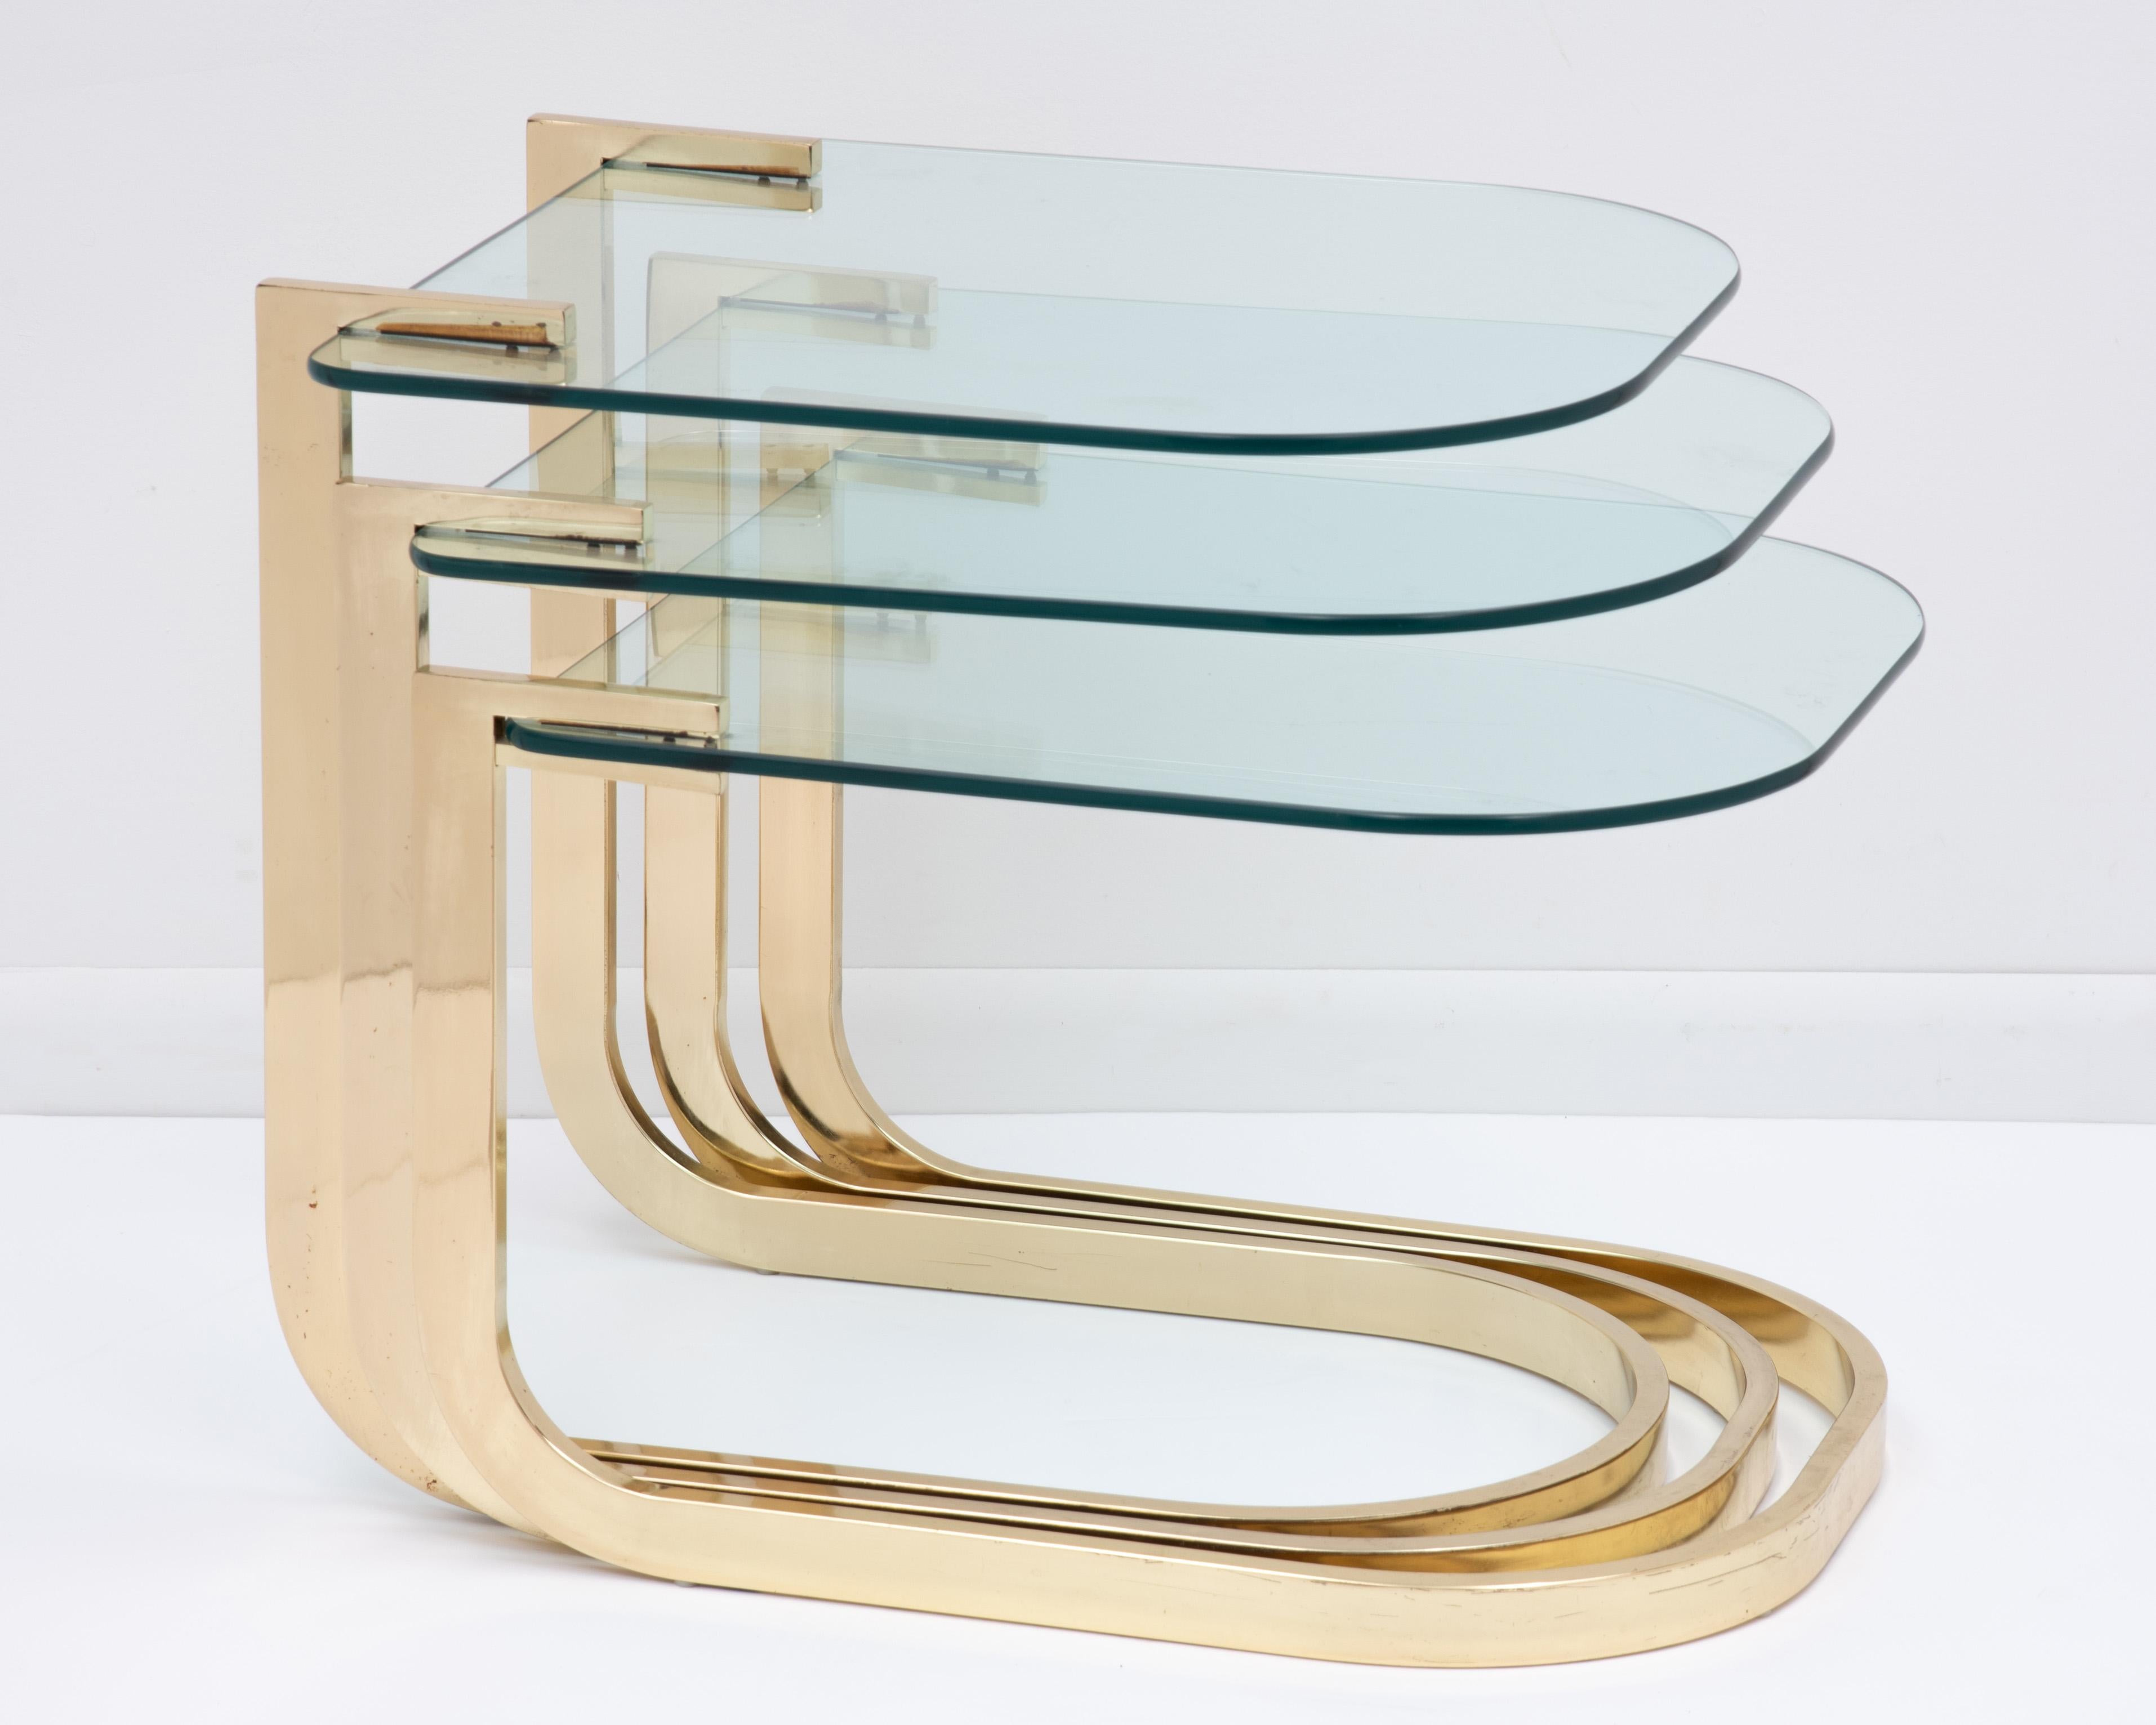 A set of three cantilevered glass and brass nesting tables designed by Milo Baughman for DIA (Design Institute of America). Fully marked with the DIA foil label on the underside of the middle table, ca 1984 serial number 82566. The reflection of the